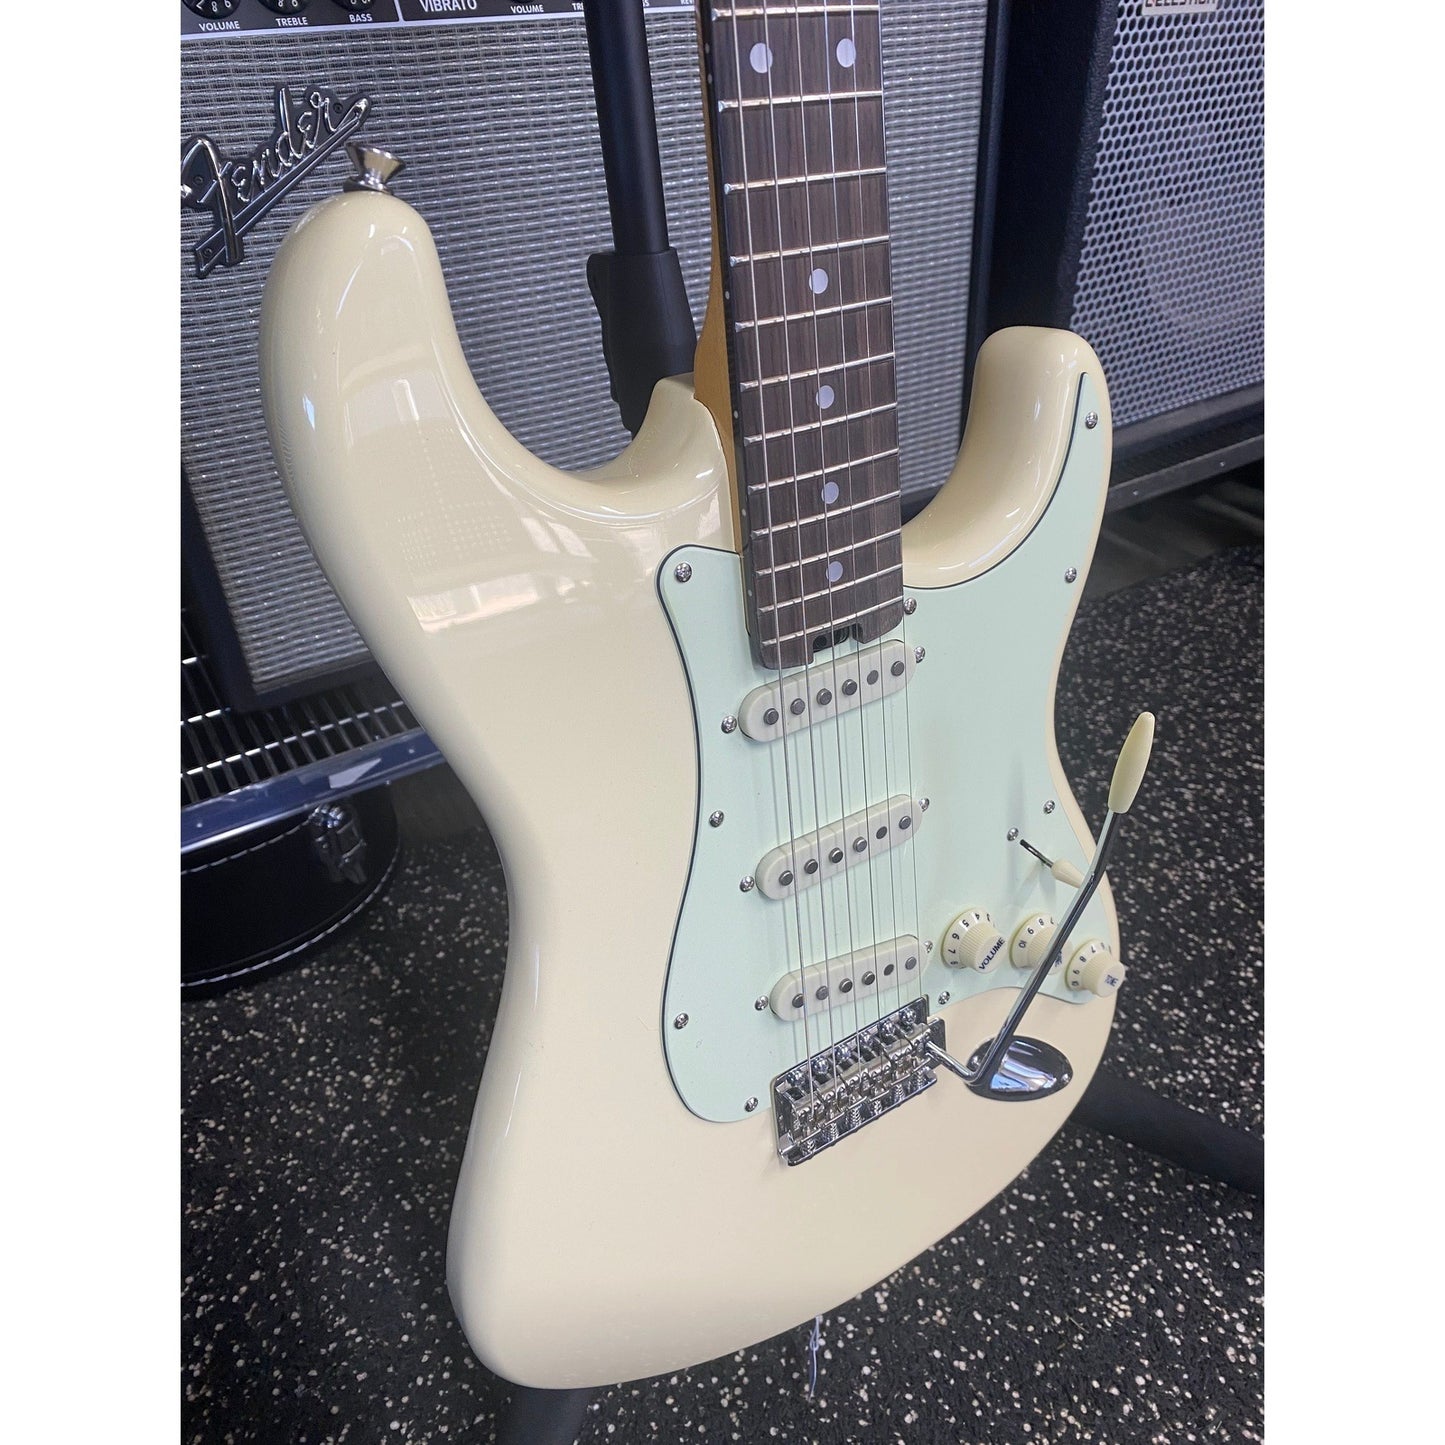 Aria STG-62 Modern Classics Series Electric Guitar in Vintage White with Mint Green Pickguard